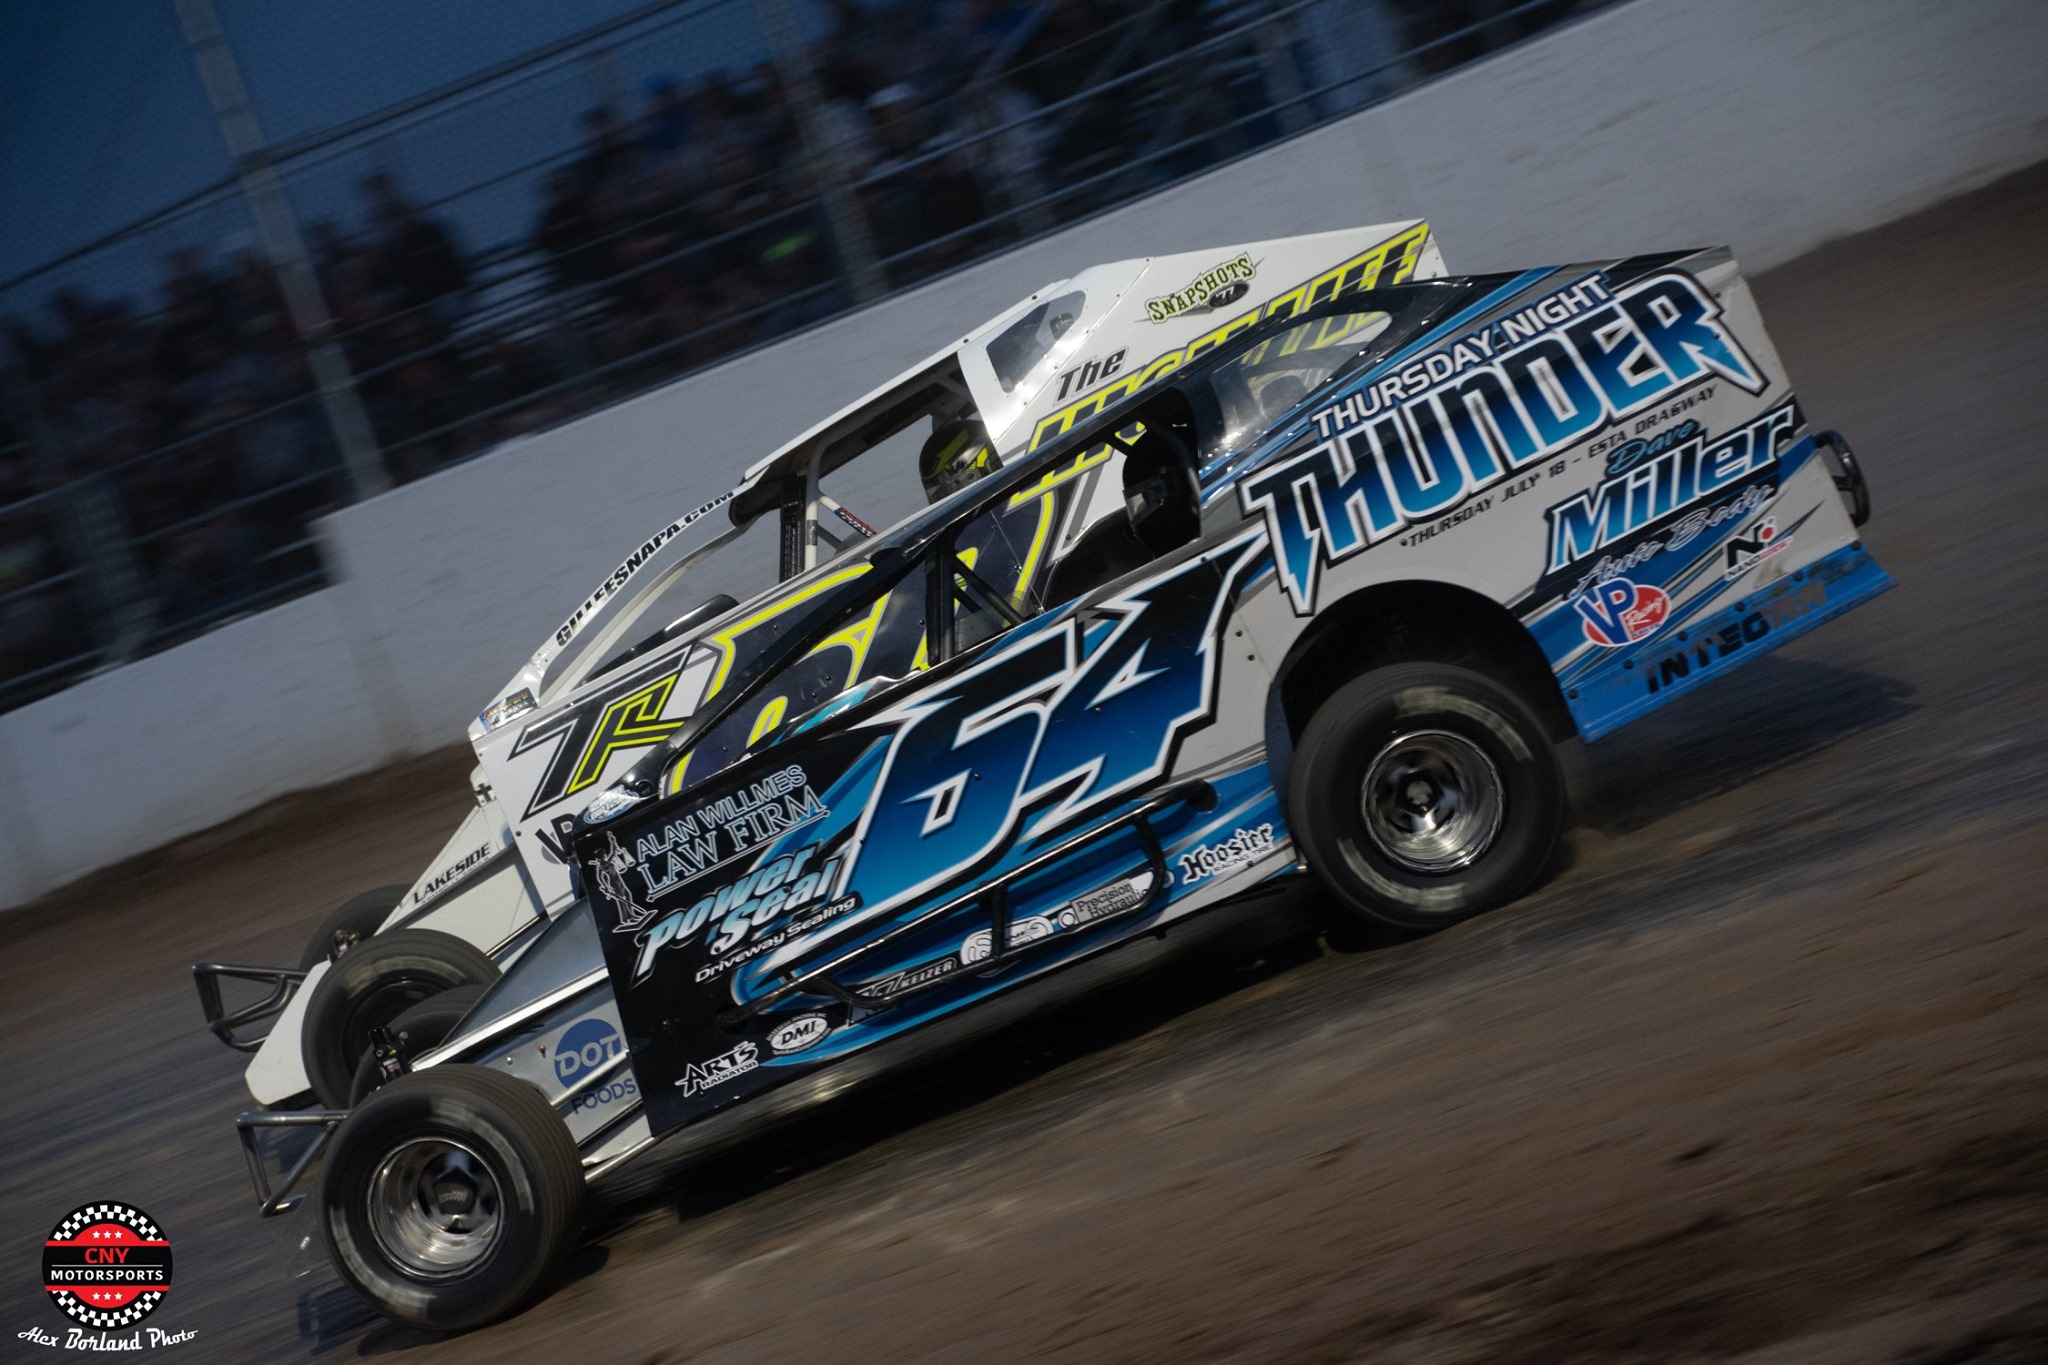 Sportsman Racing’s Best to Contend in Sportsman Classic on July 2